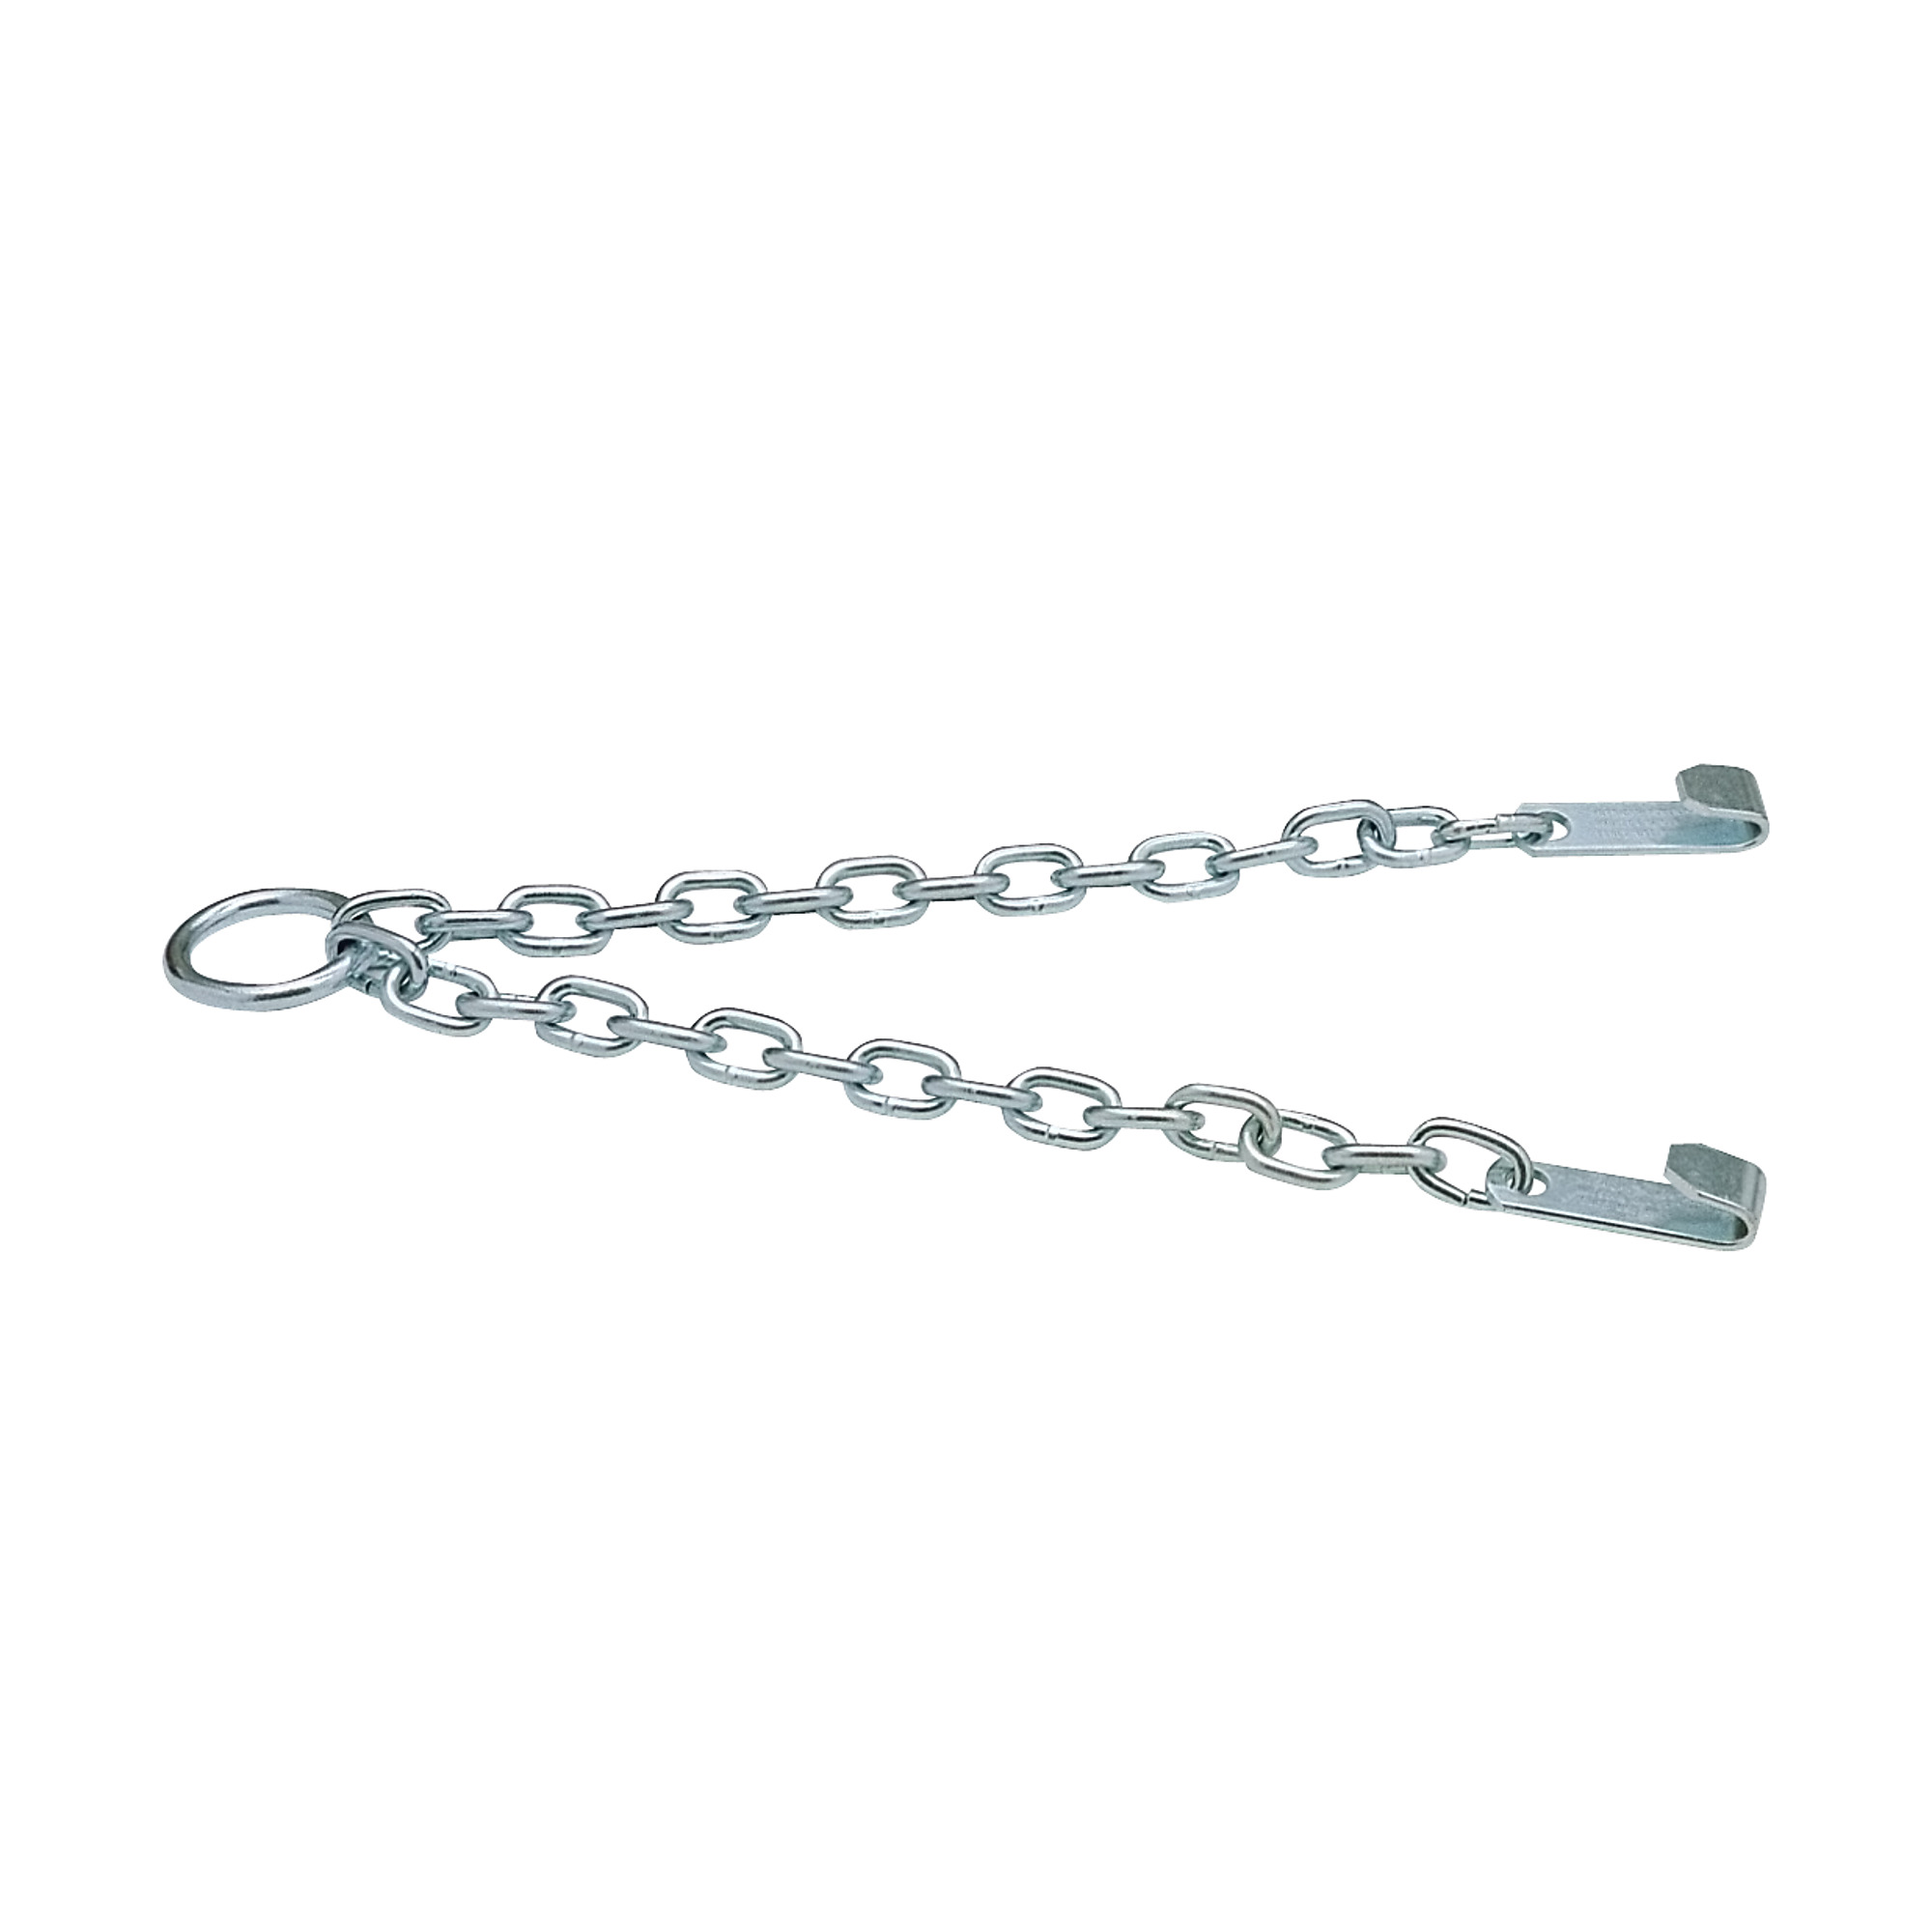 American Power Pull, Pull Chain, Capacity 1000 lb, Pieces (qty.) 1, Model PP7069